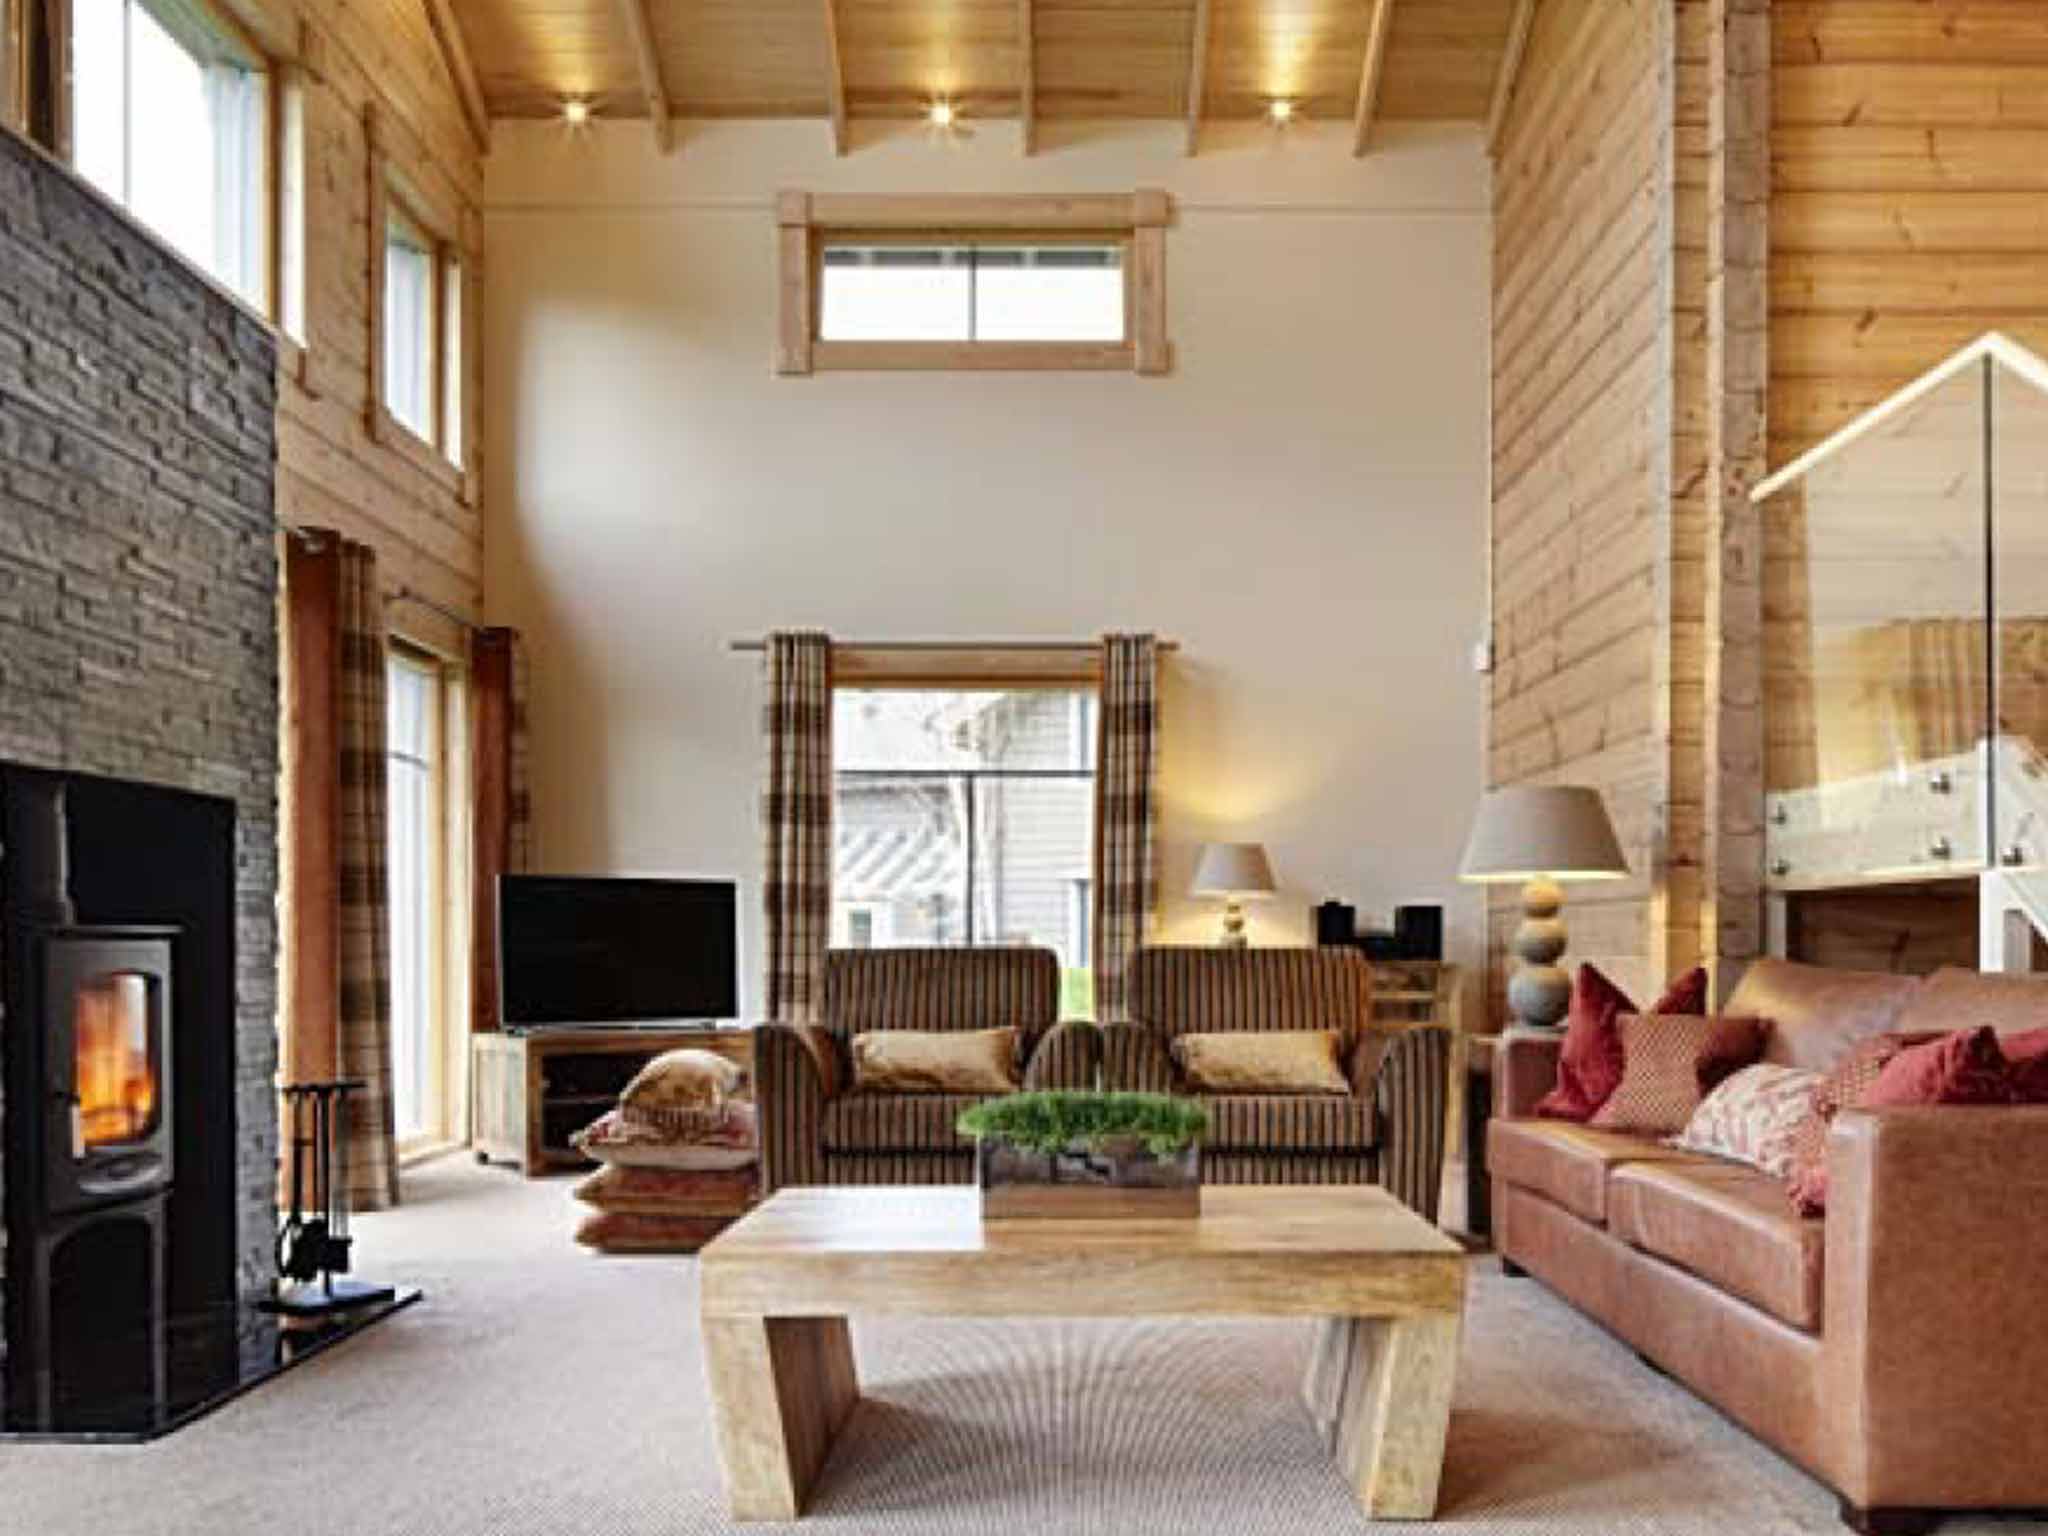 Double height ceilings dominate living spaces